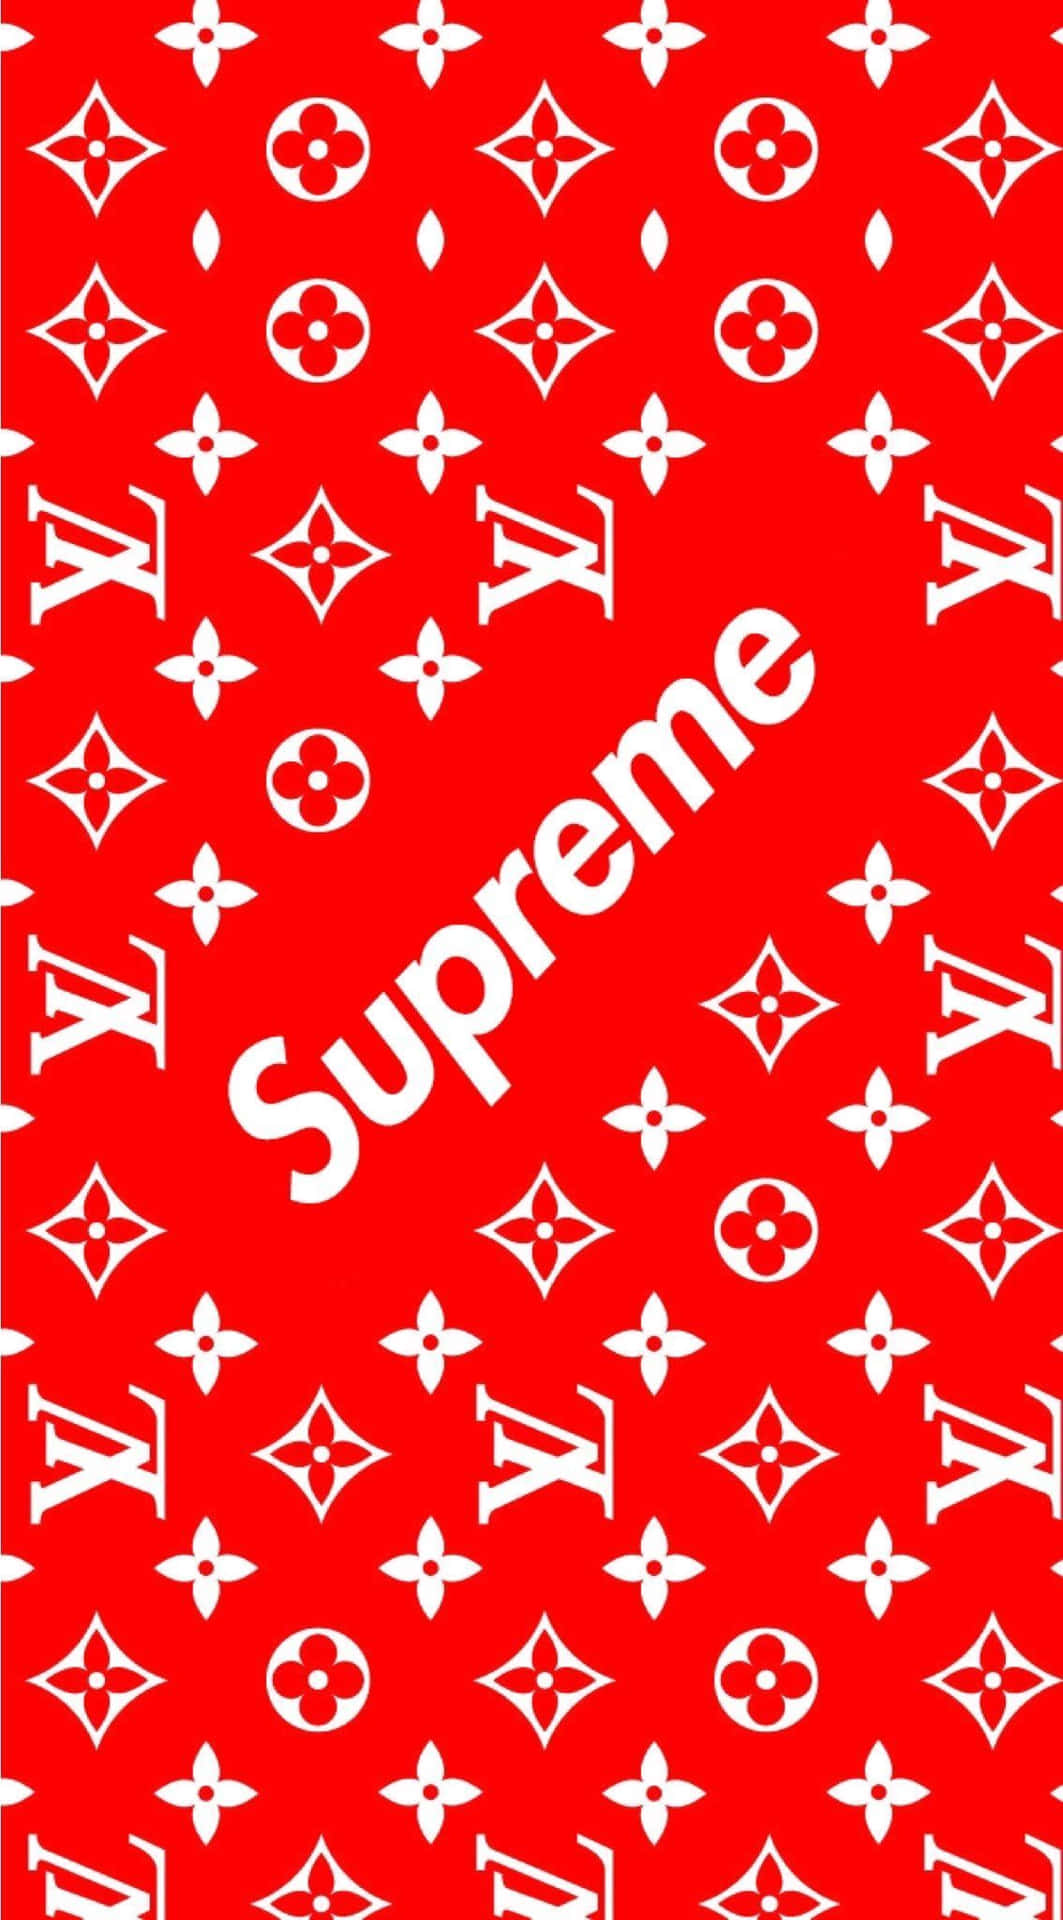  1001 ideas For a Cool and Fresh Supreme Wallpaper  Supreme iphone  wallpaper Supreme wallpaper Iphone wallpaper